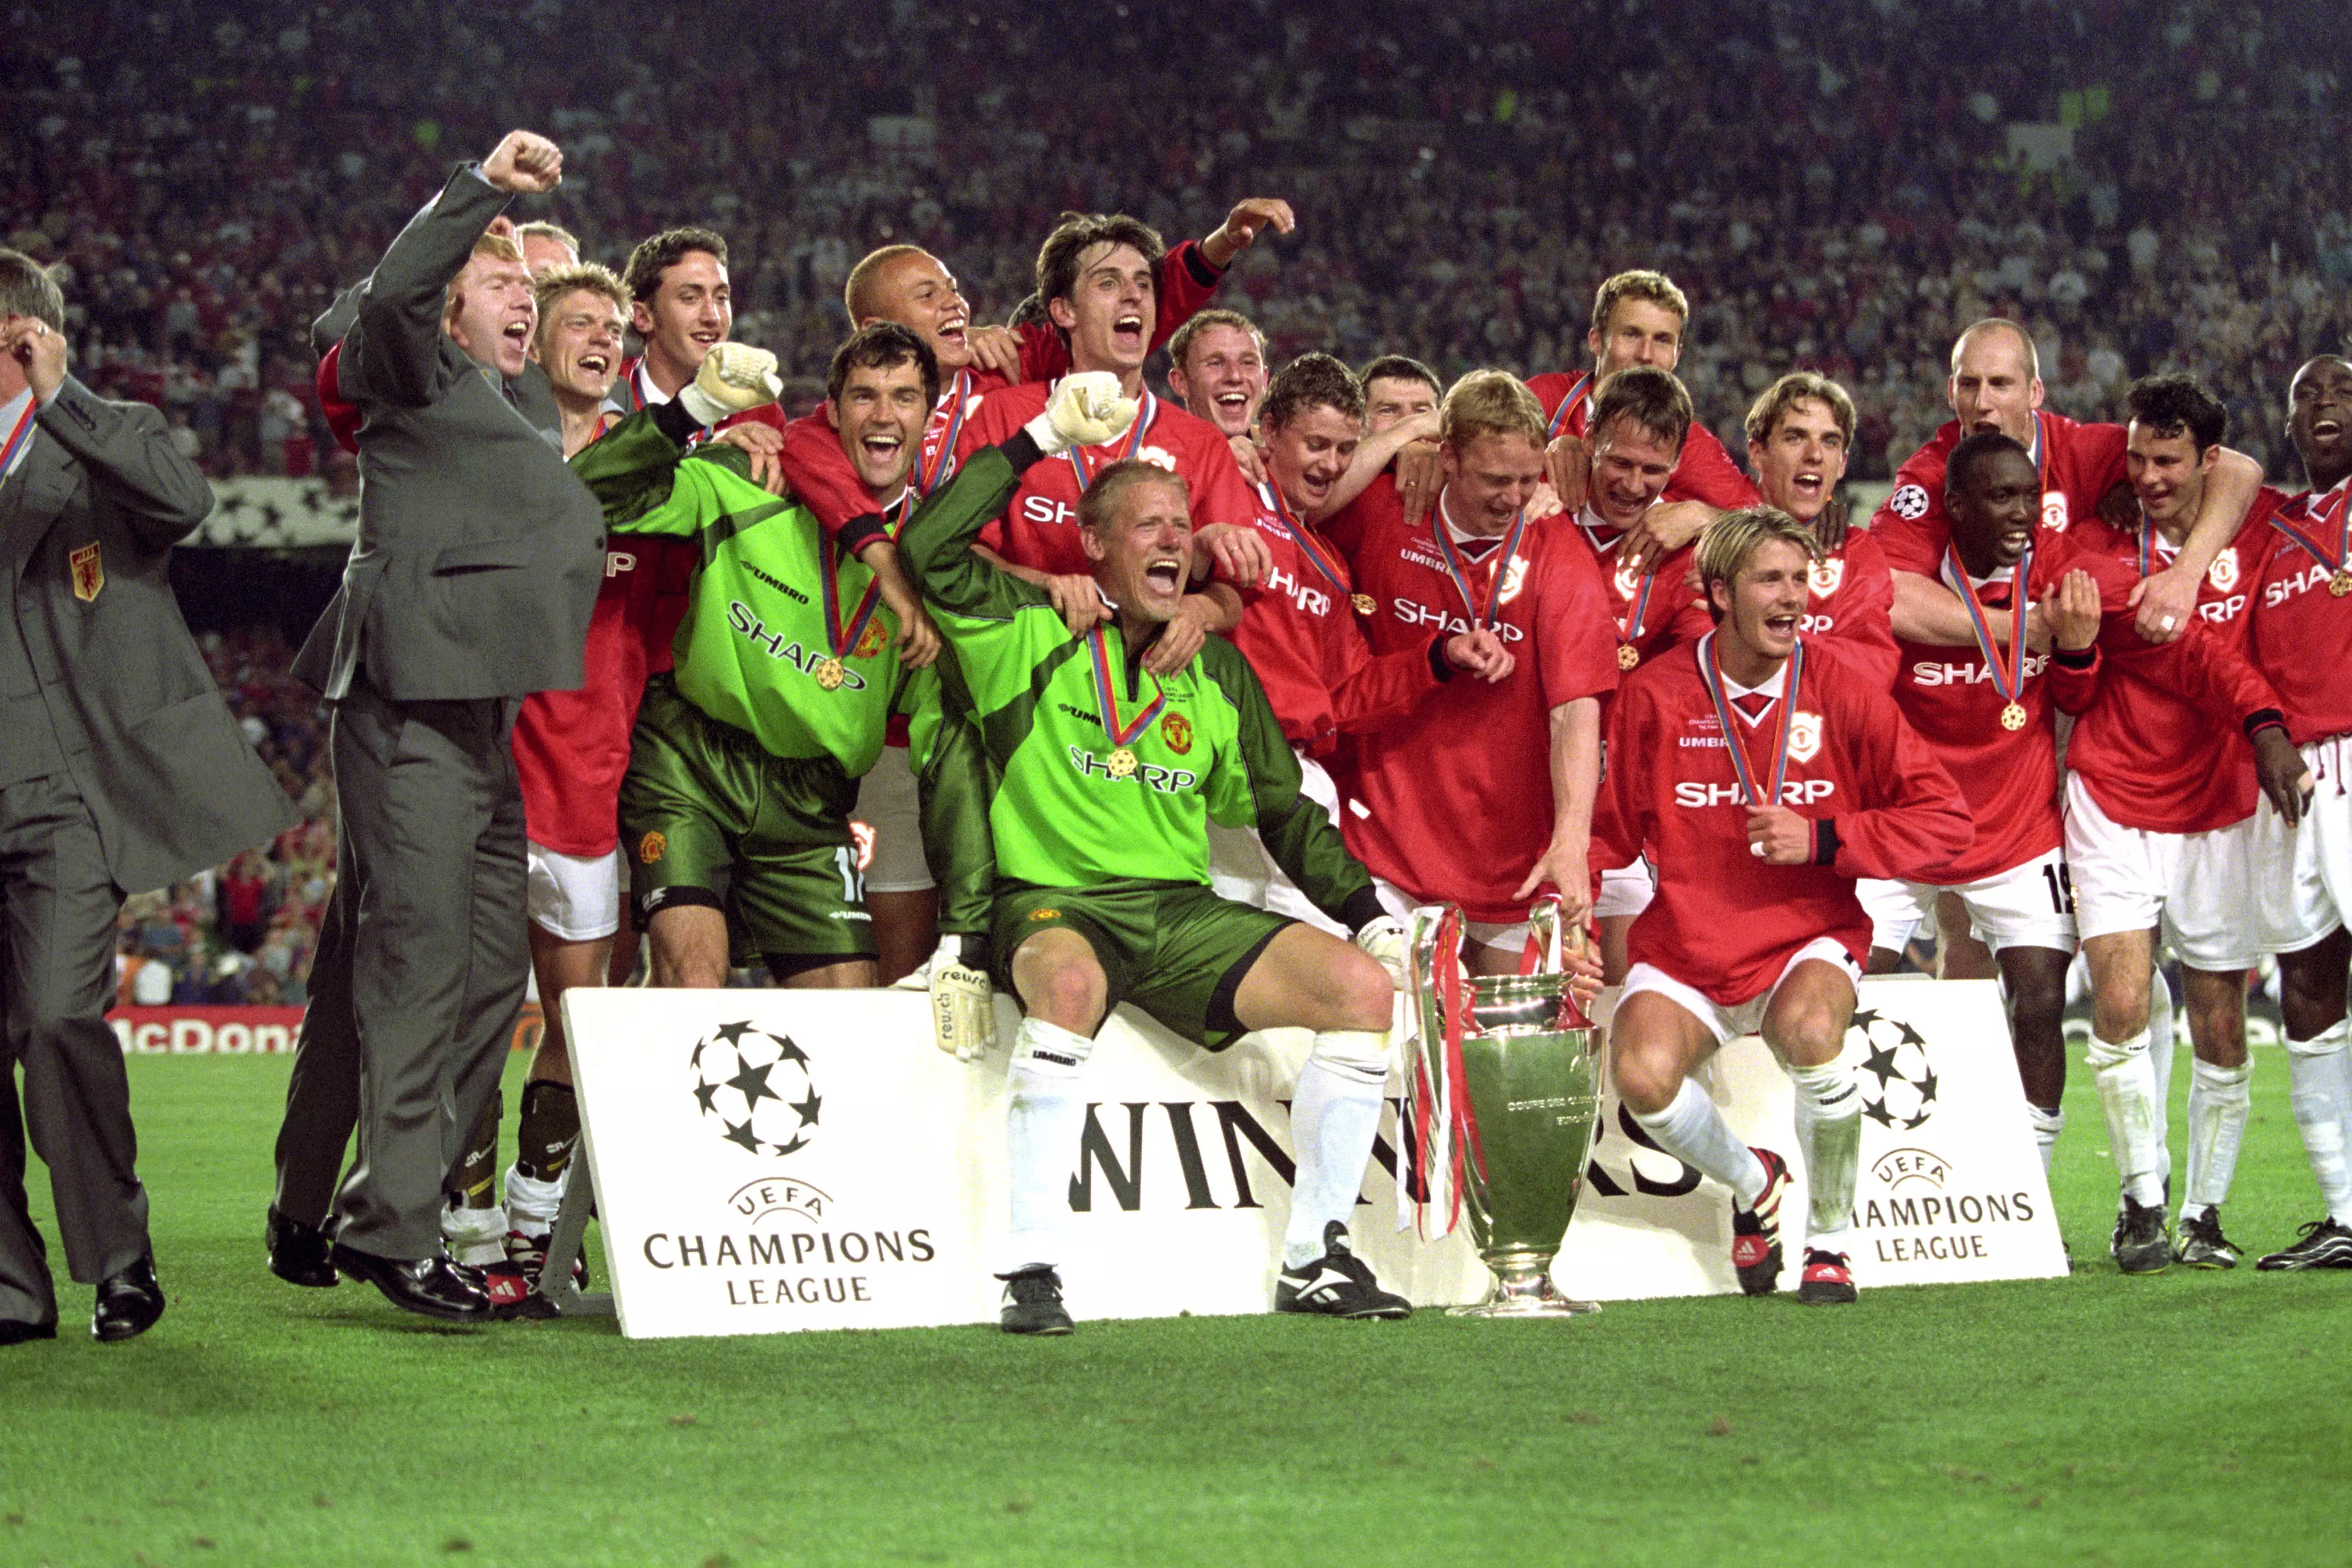 The win in 99 proves their name is once again on the trophy. Image: PA Images